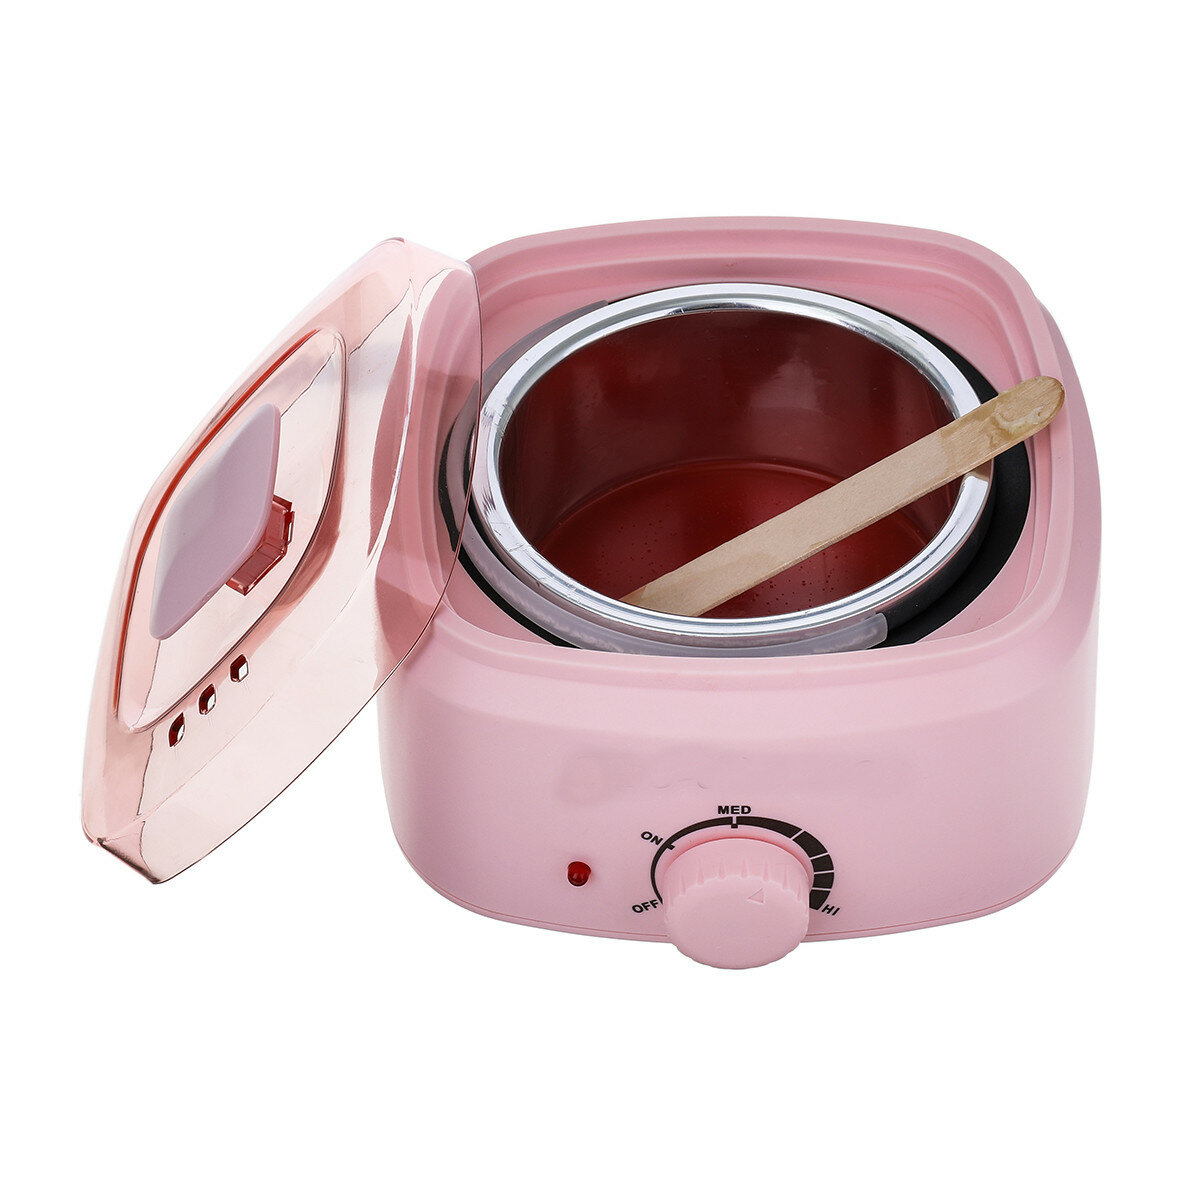 YFM 500cc 100W Wax Heater Machine for Face Body See-through Vented Cover Removable Aluminum Pot 360?